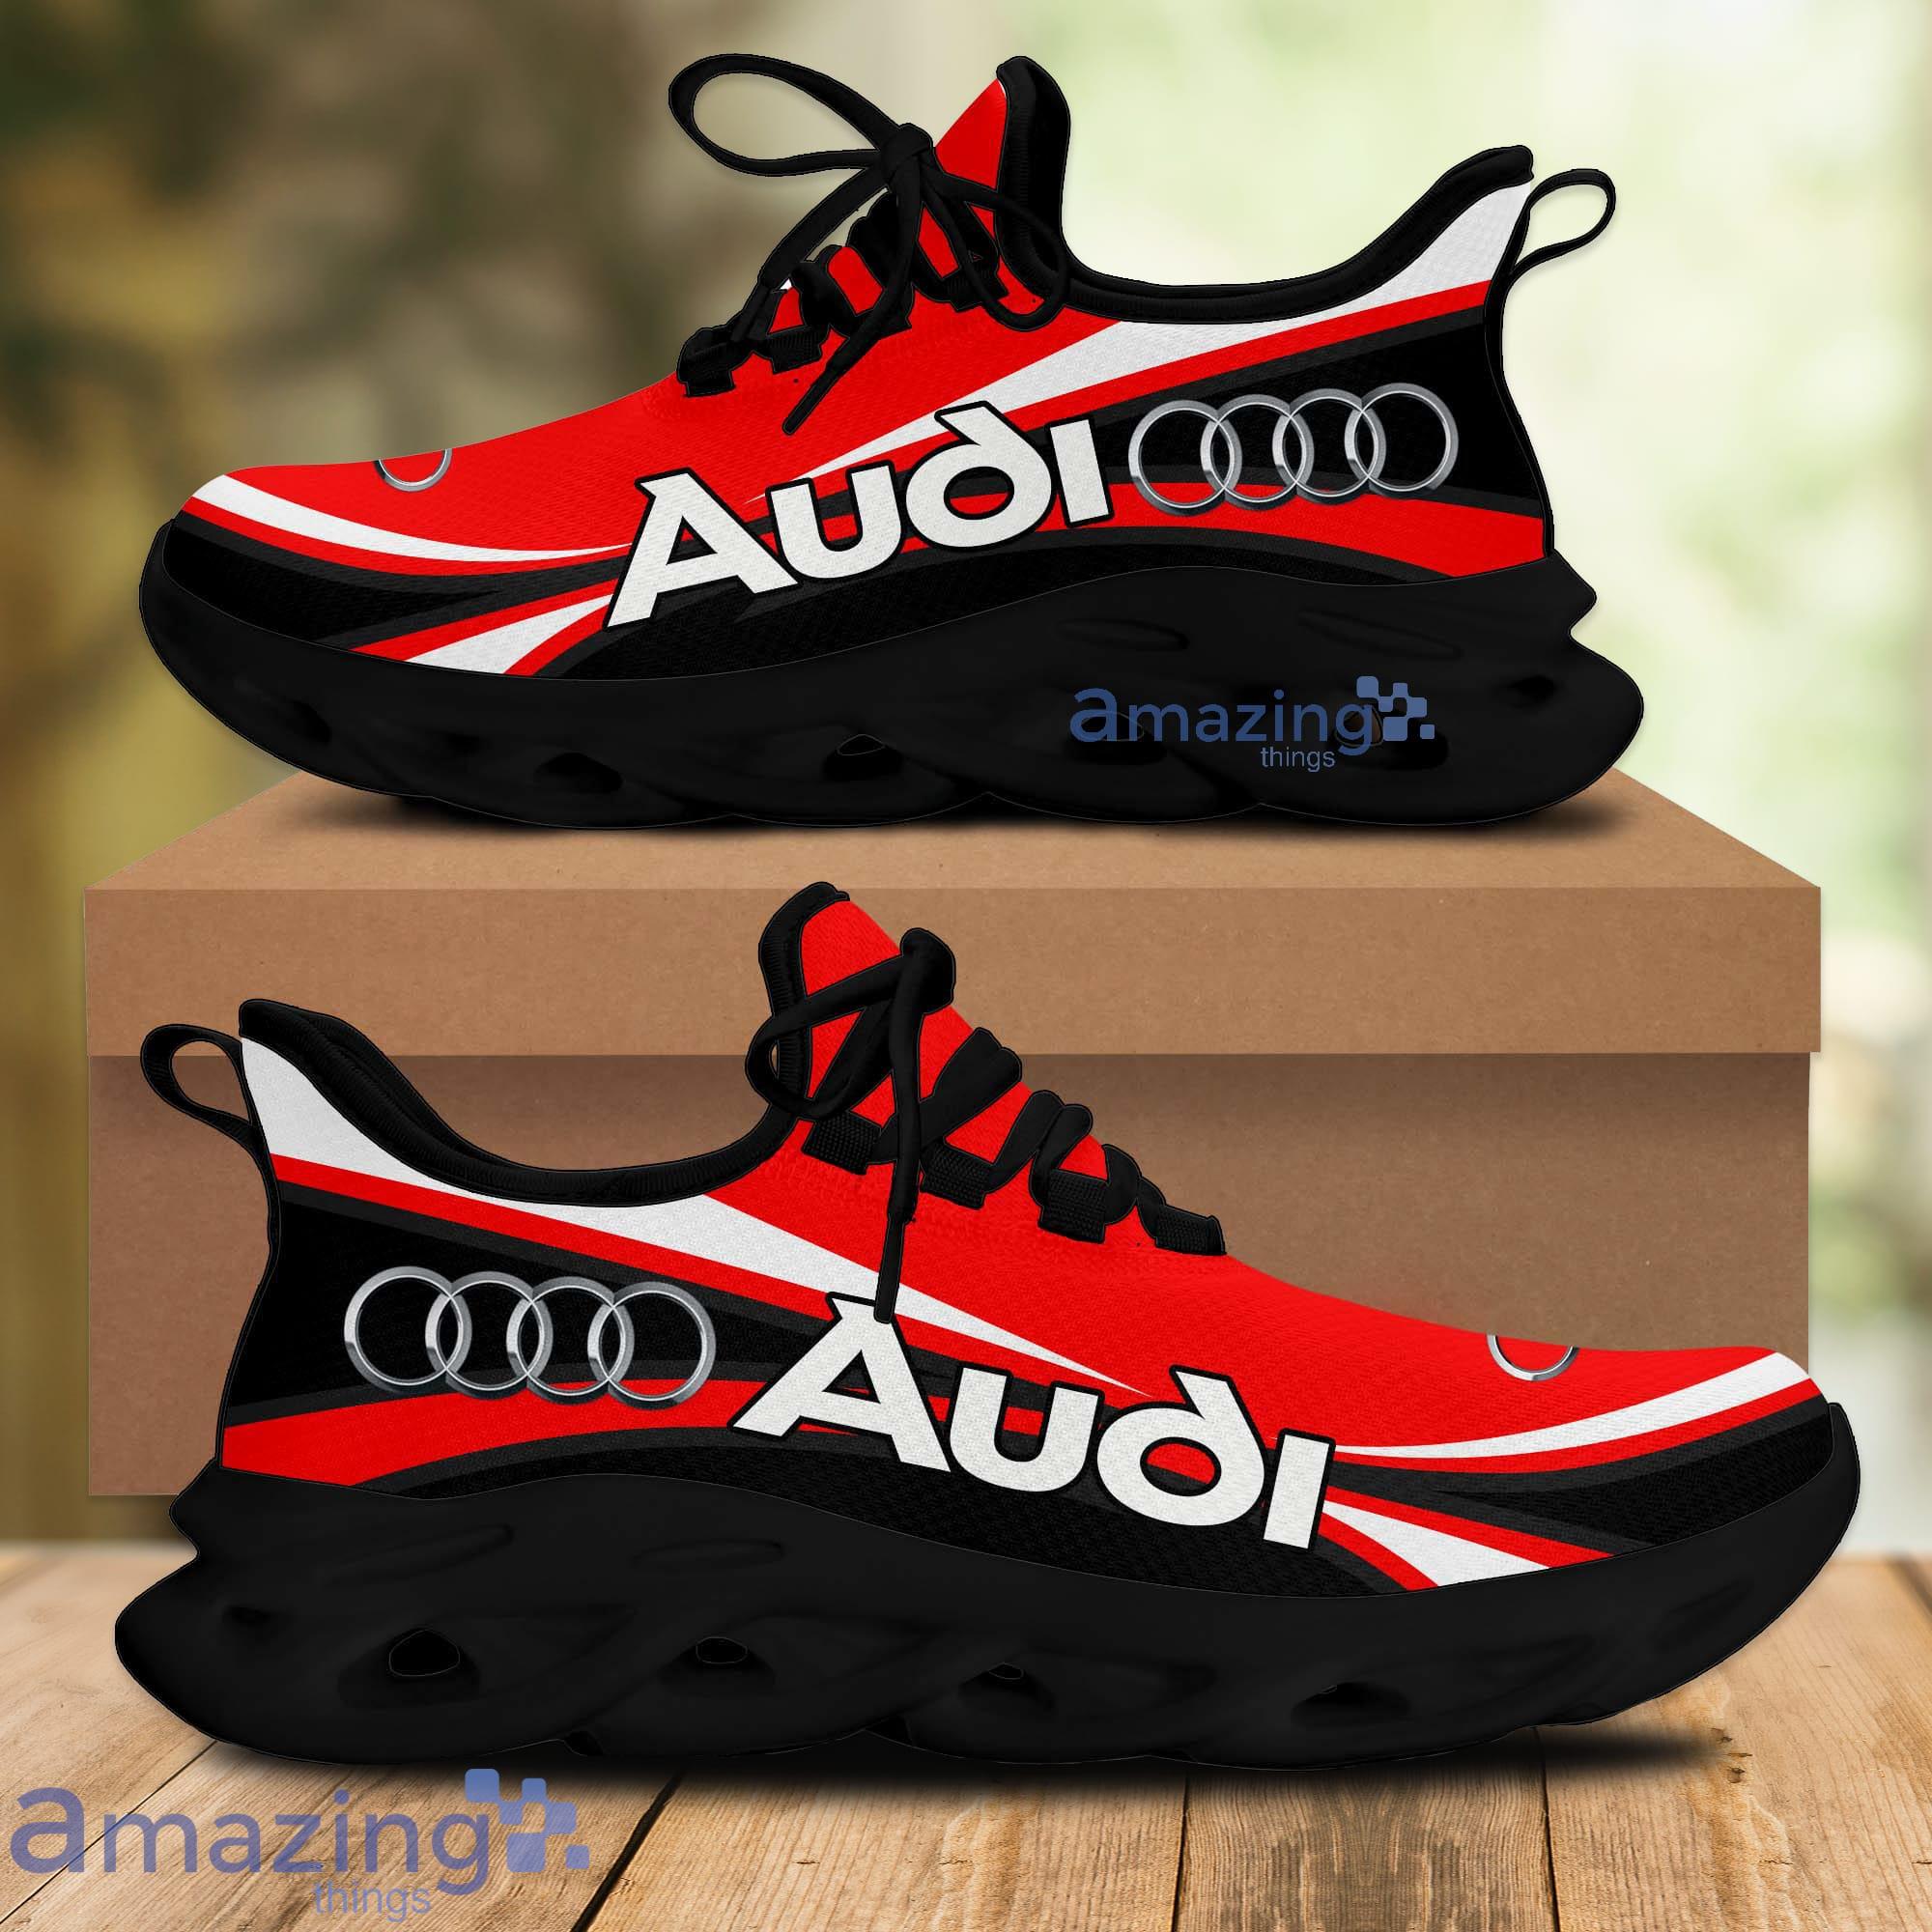 Audi Max Soul Shoes Best Gift Clunky Running Sneakers For Men And Women